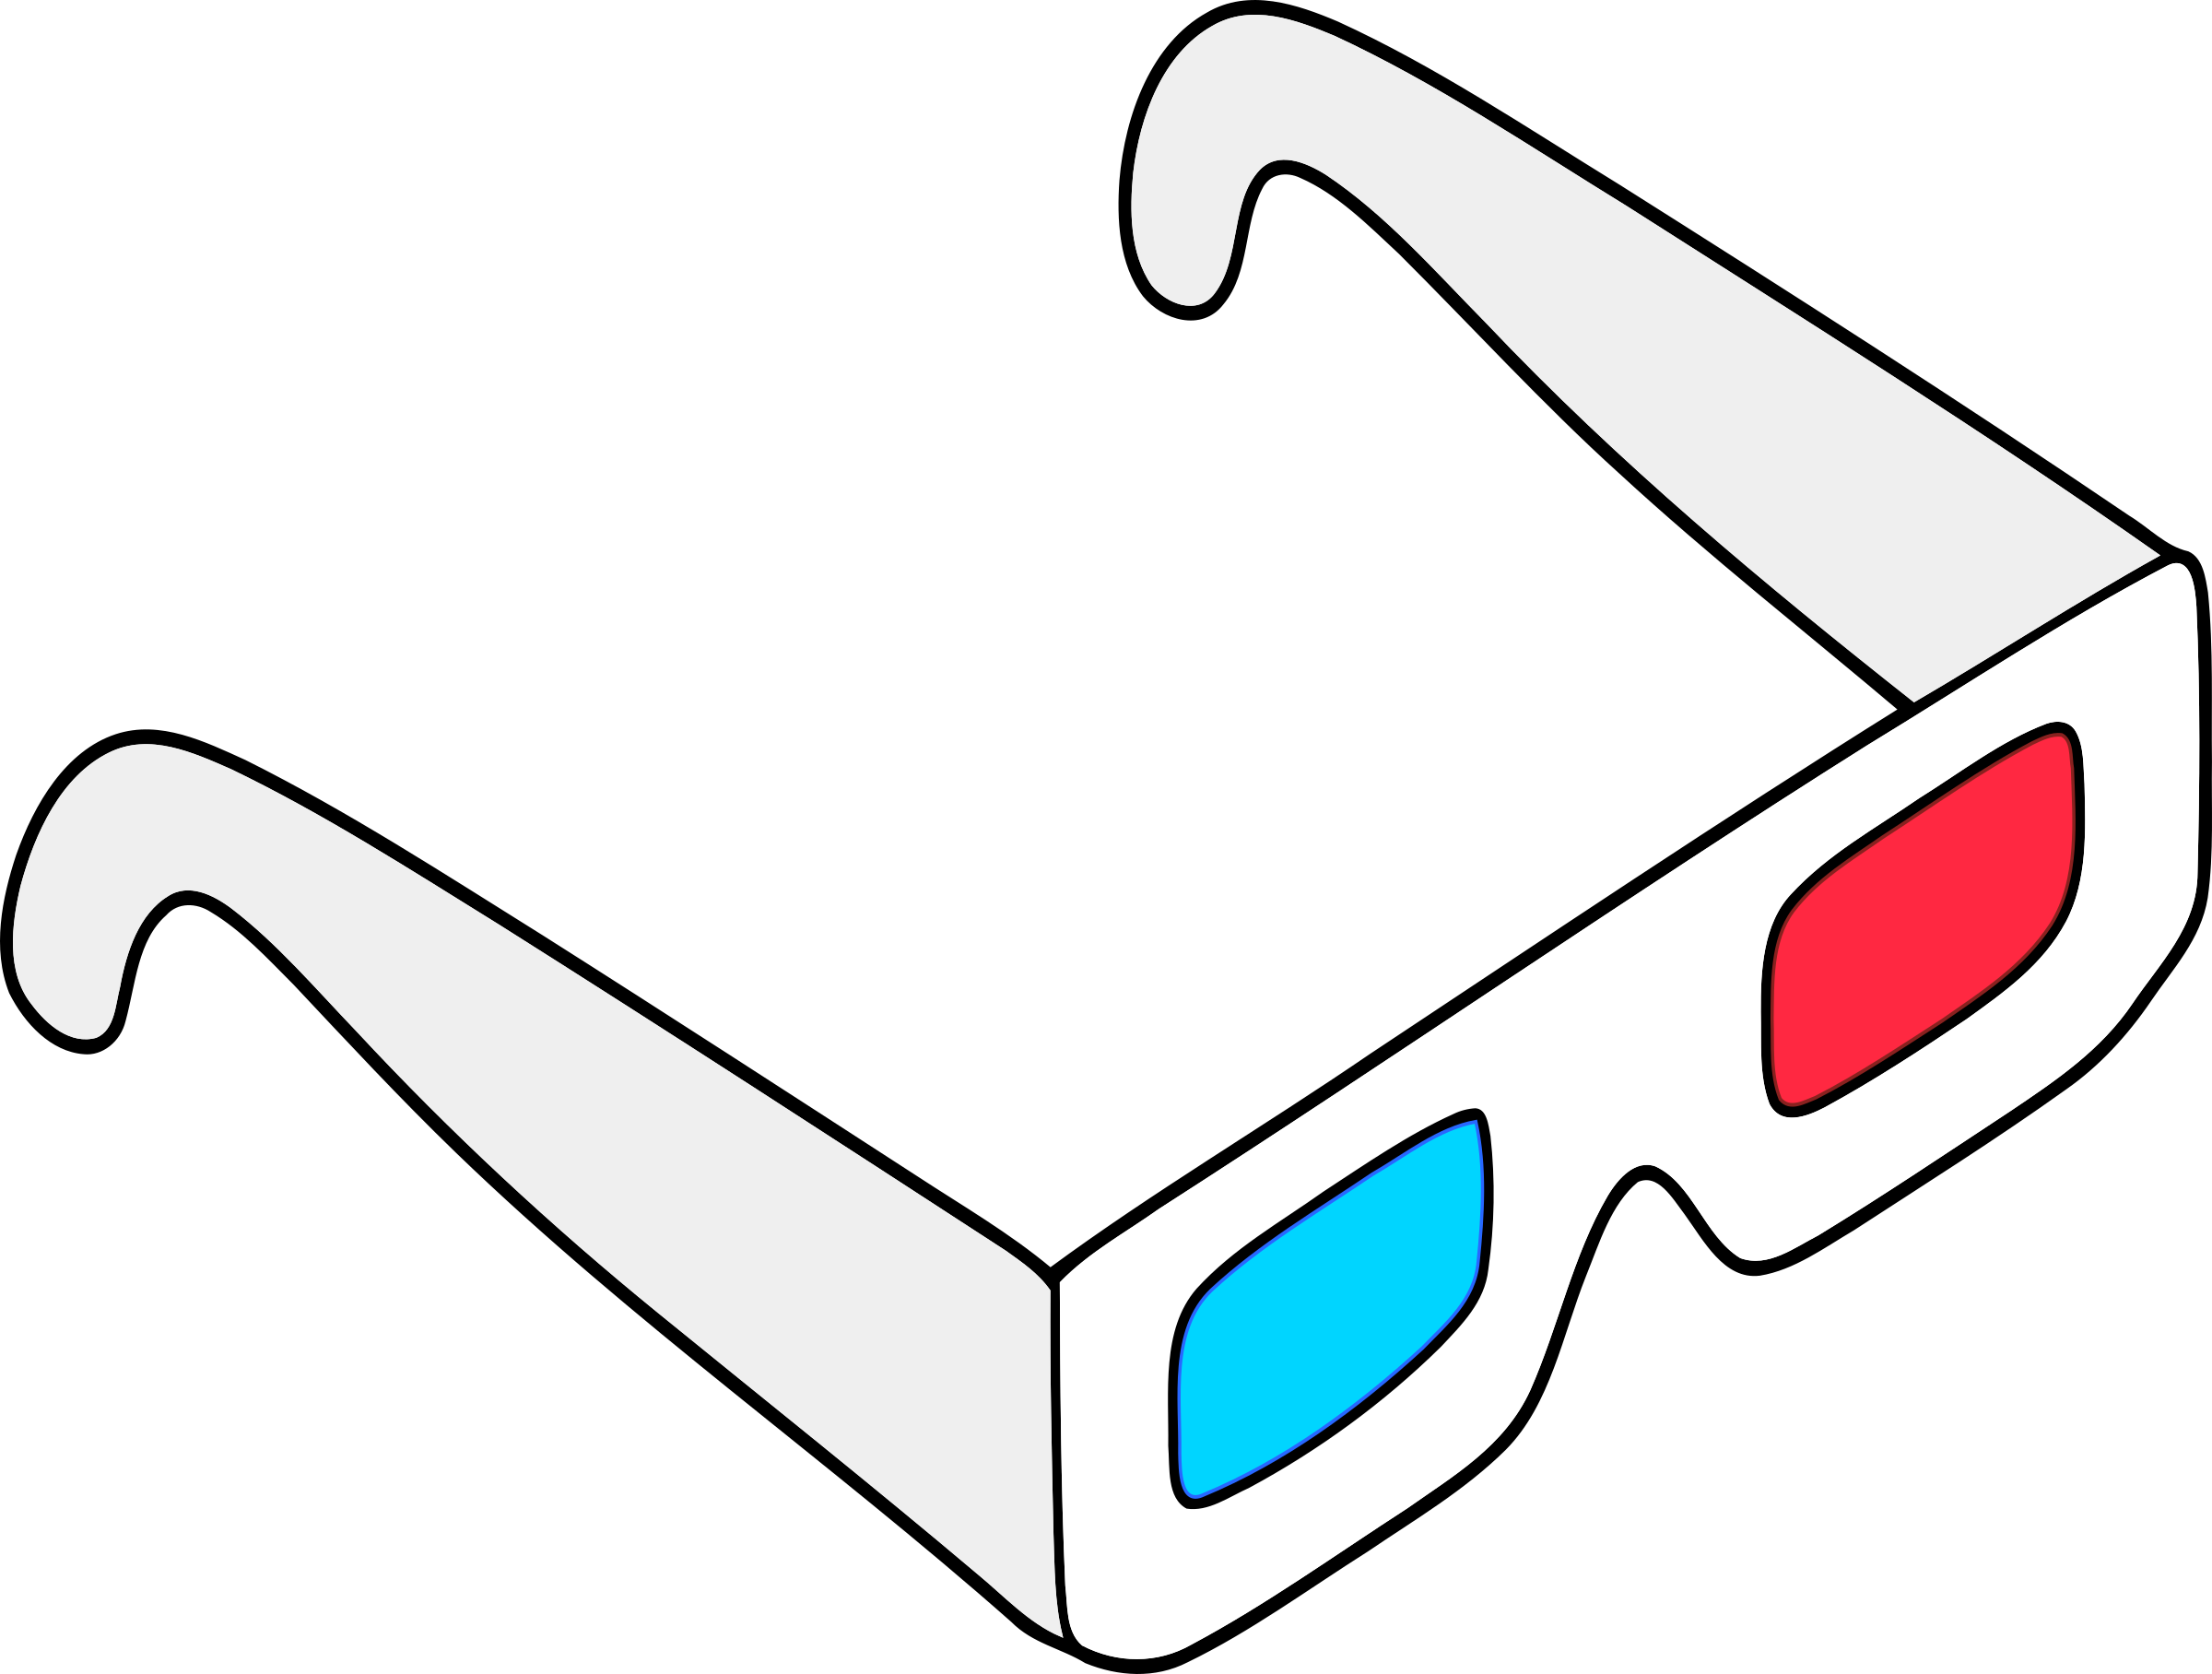 Anaglyph Glasses colored vector clipart image